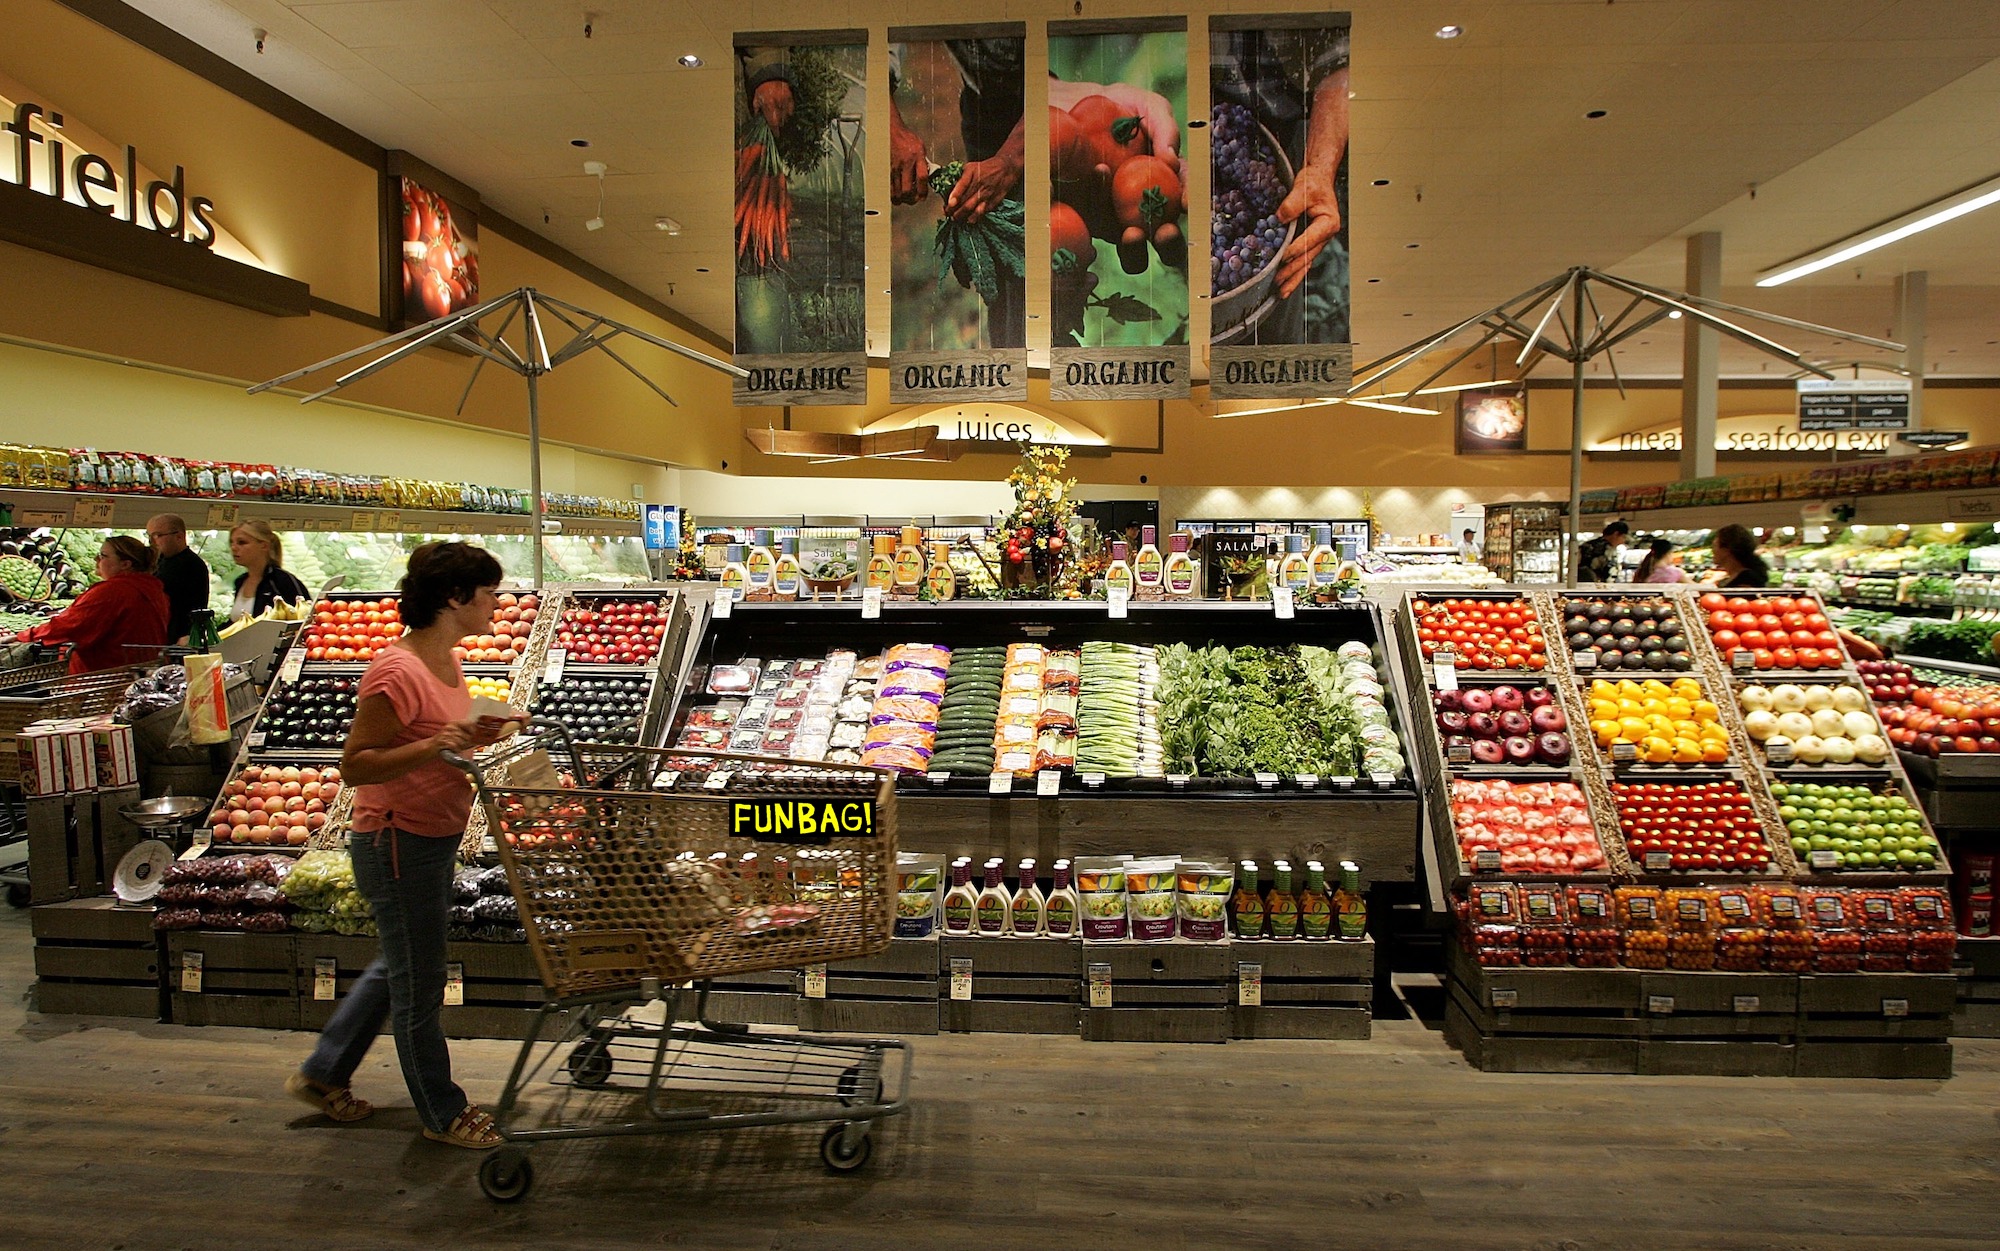 LIVERMORE, CA - JULY 18: A Safeway customer browses in the fruit and vegetable section at Safeway's new "Lifestyle" store July 18, 2007 in Livermore, California. Safeway unveiled its newest Lifestyle store that features numerous organic and natural foods as well as expanded produce, meat, seafood and floral departments. The store also offers freshly made desserts and baked goods, a coffee roaster, a fresh nut bar and wine section with over 2,000 wines, some of which are stored in a climate controlled wine cellar. (Photo by Justin Sullivan/Getty Images)